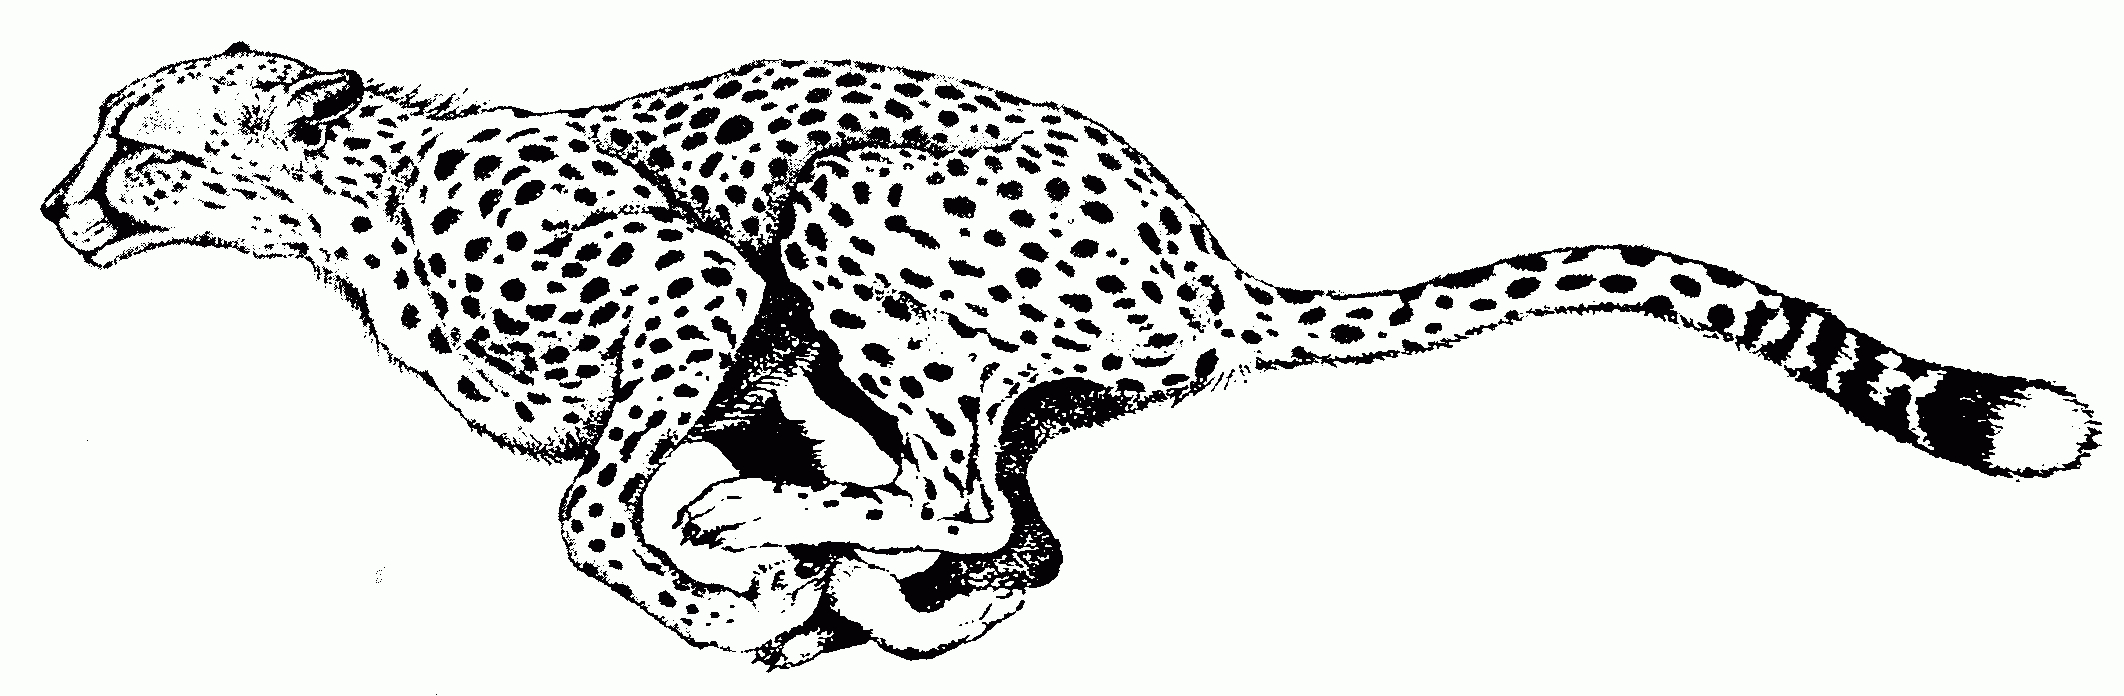 Cheetah Printable Coloring Pages - Coloring Home - Free Printable Cheetah Pictures